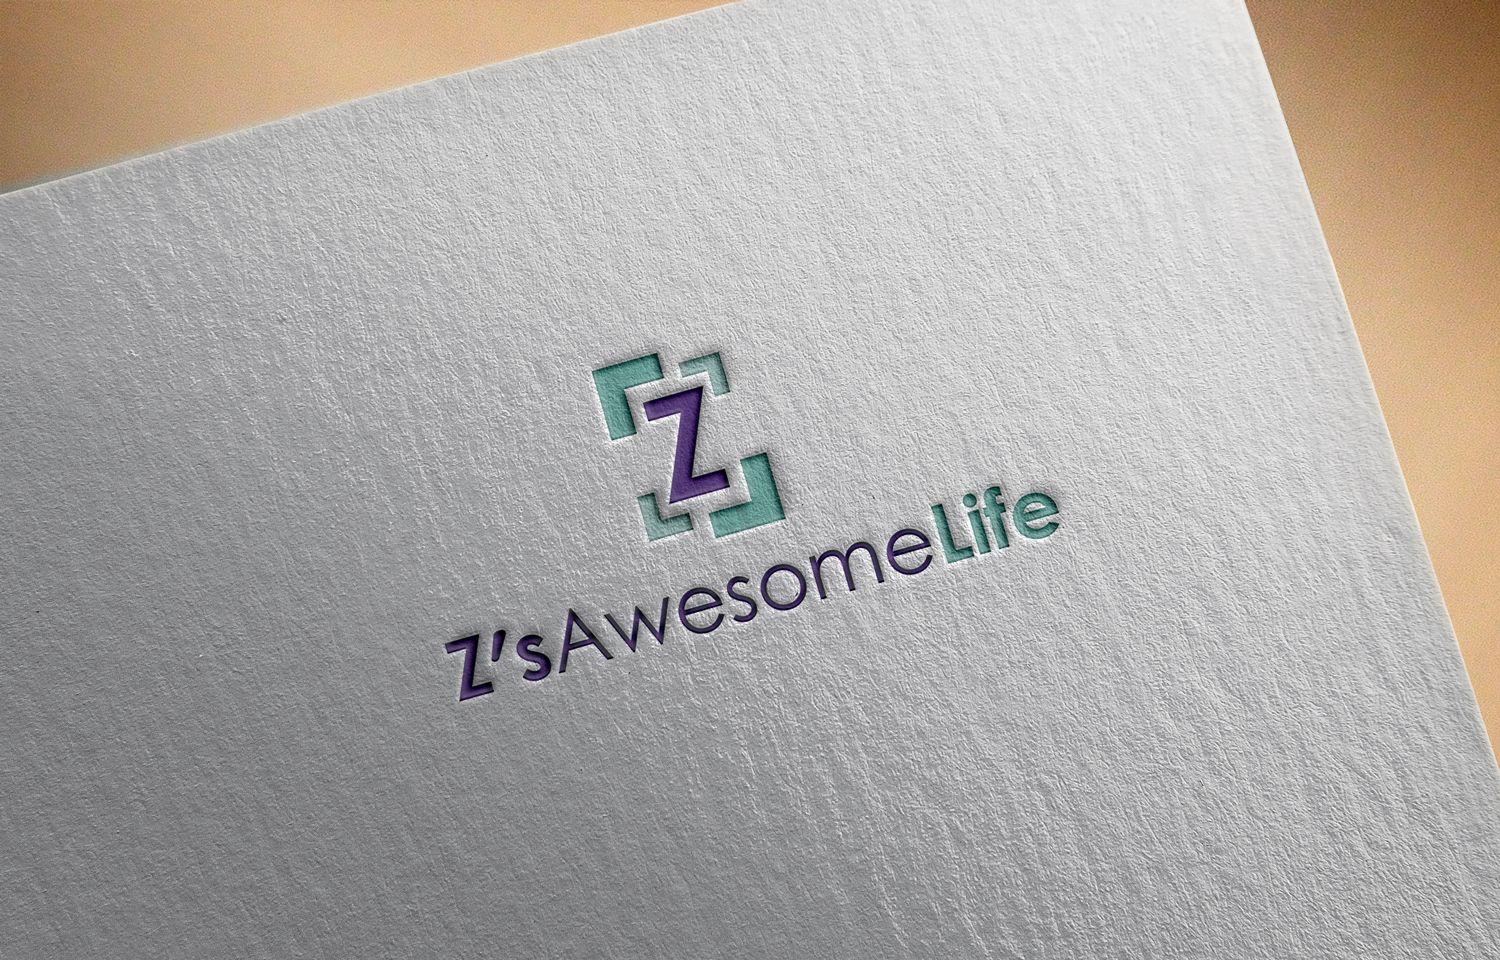 Awesome Z Logo - Playful, Modern, Videography Logo Design for Z's Awesome Life